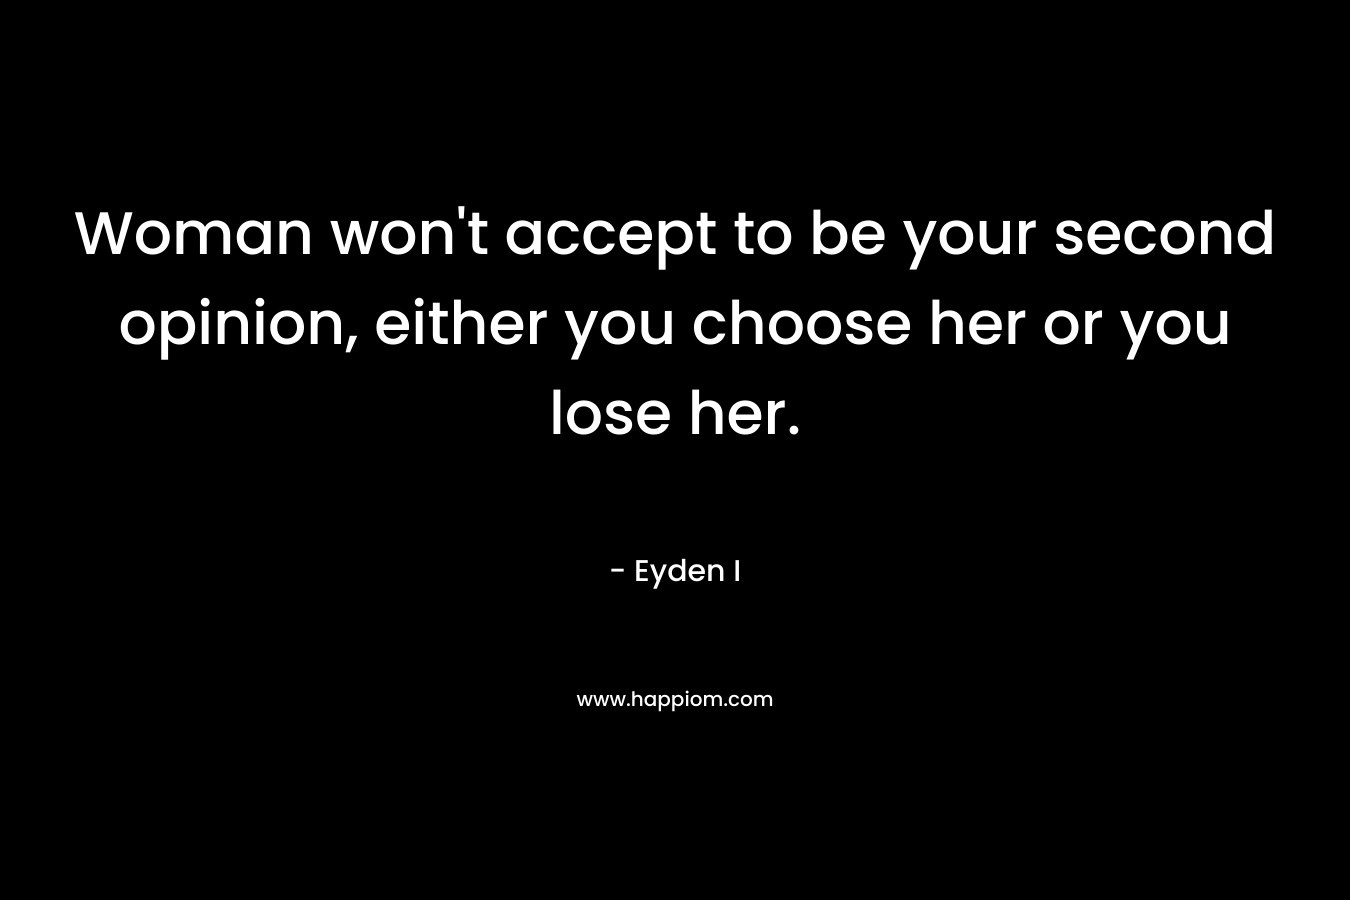 Woman won't accept to be your second opinion, either you choose her or you lose her.